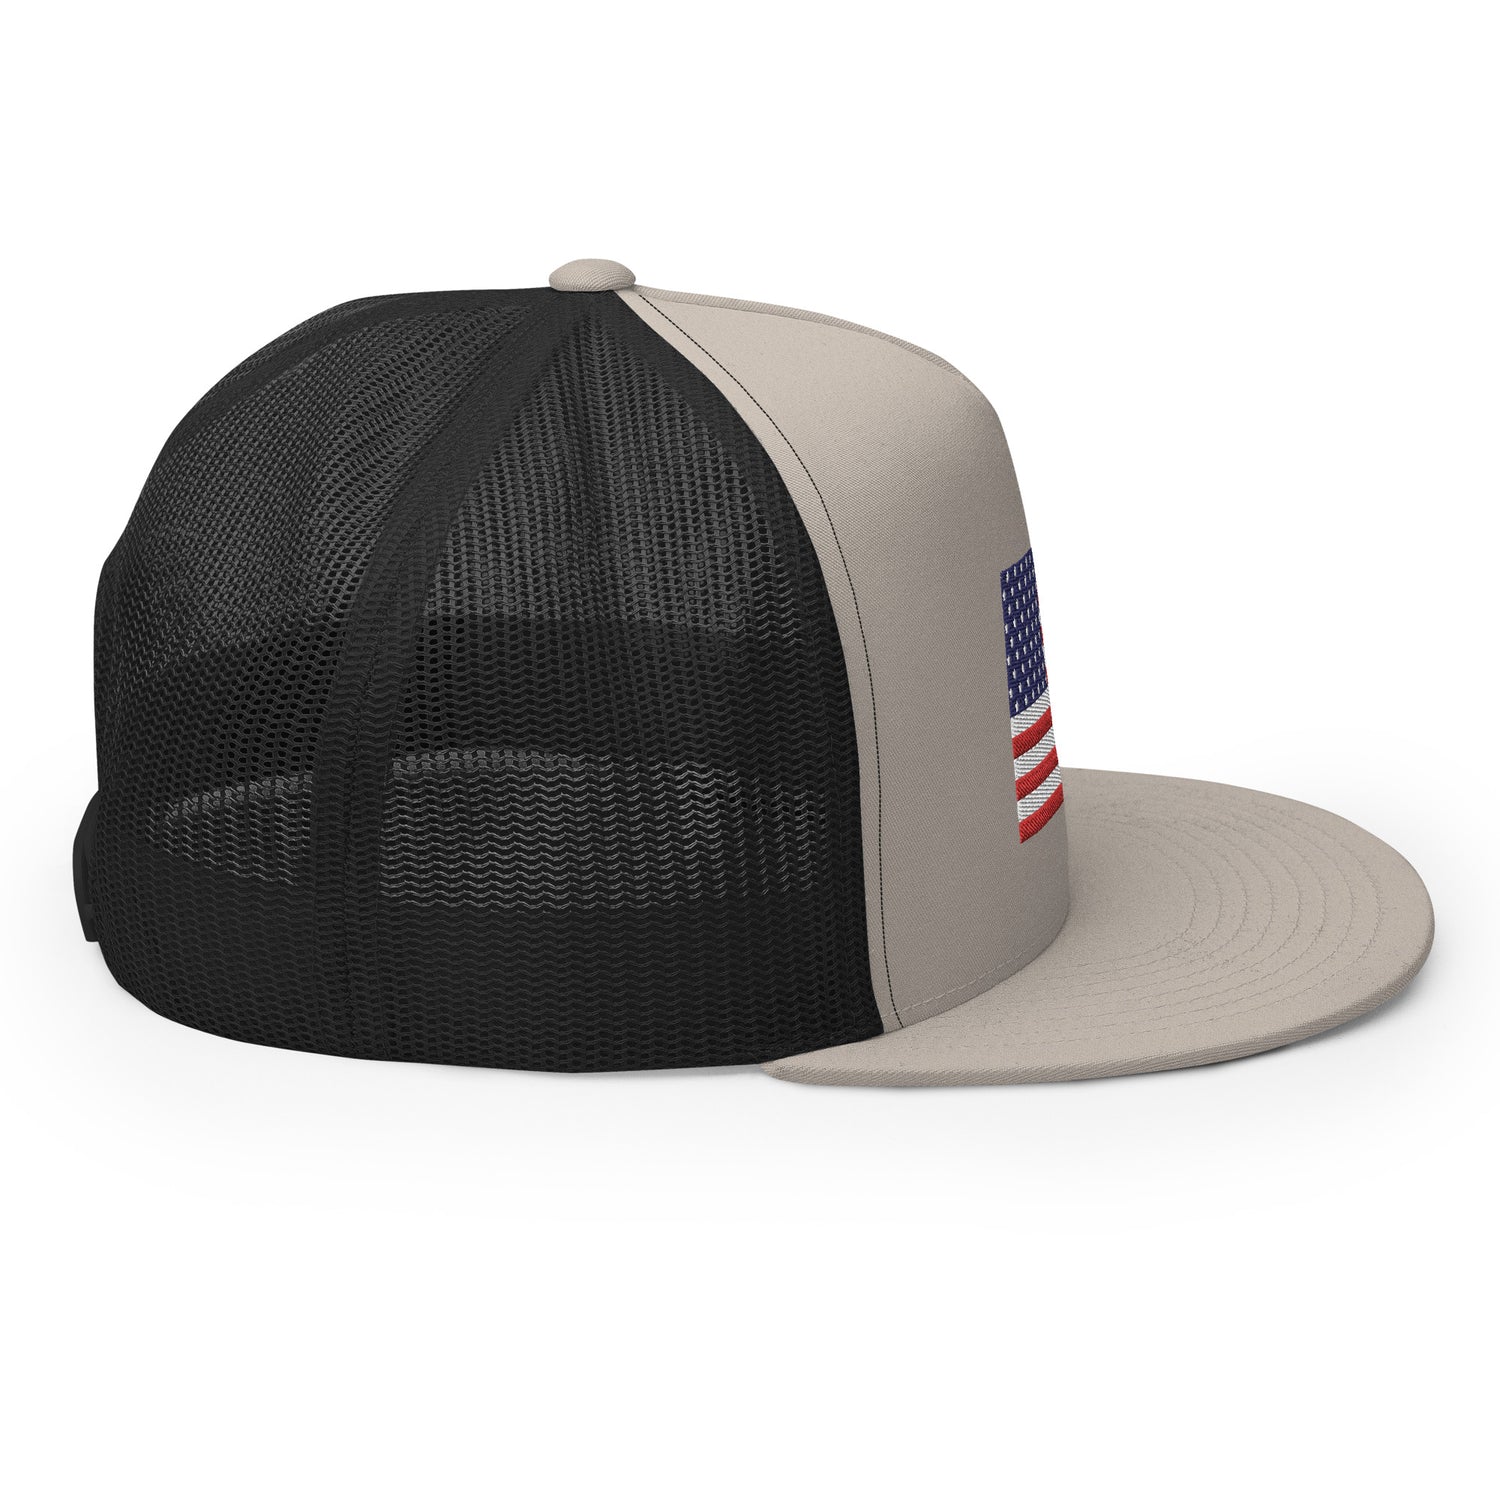 Embroidery American Flag Trucker Cap